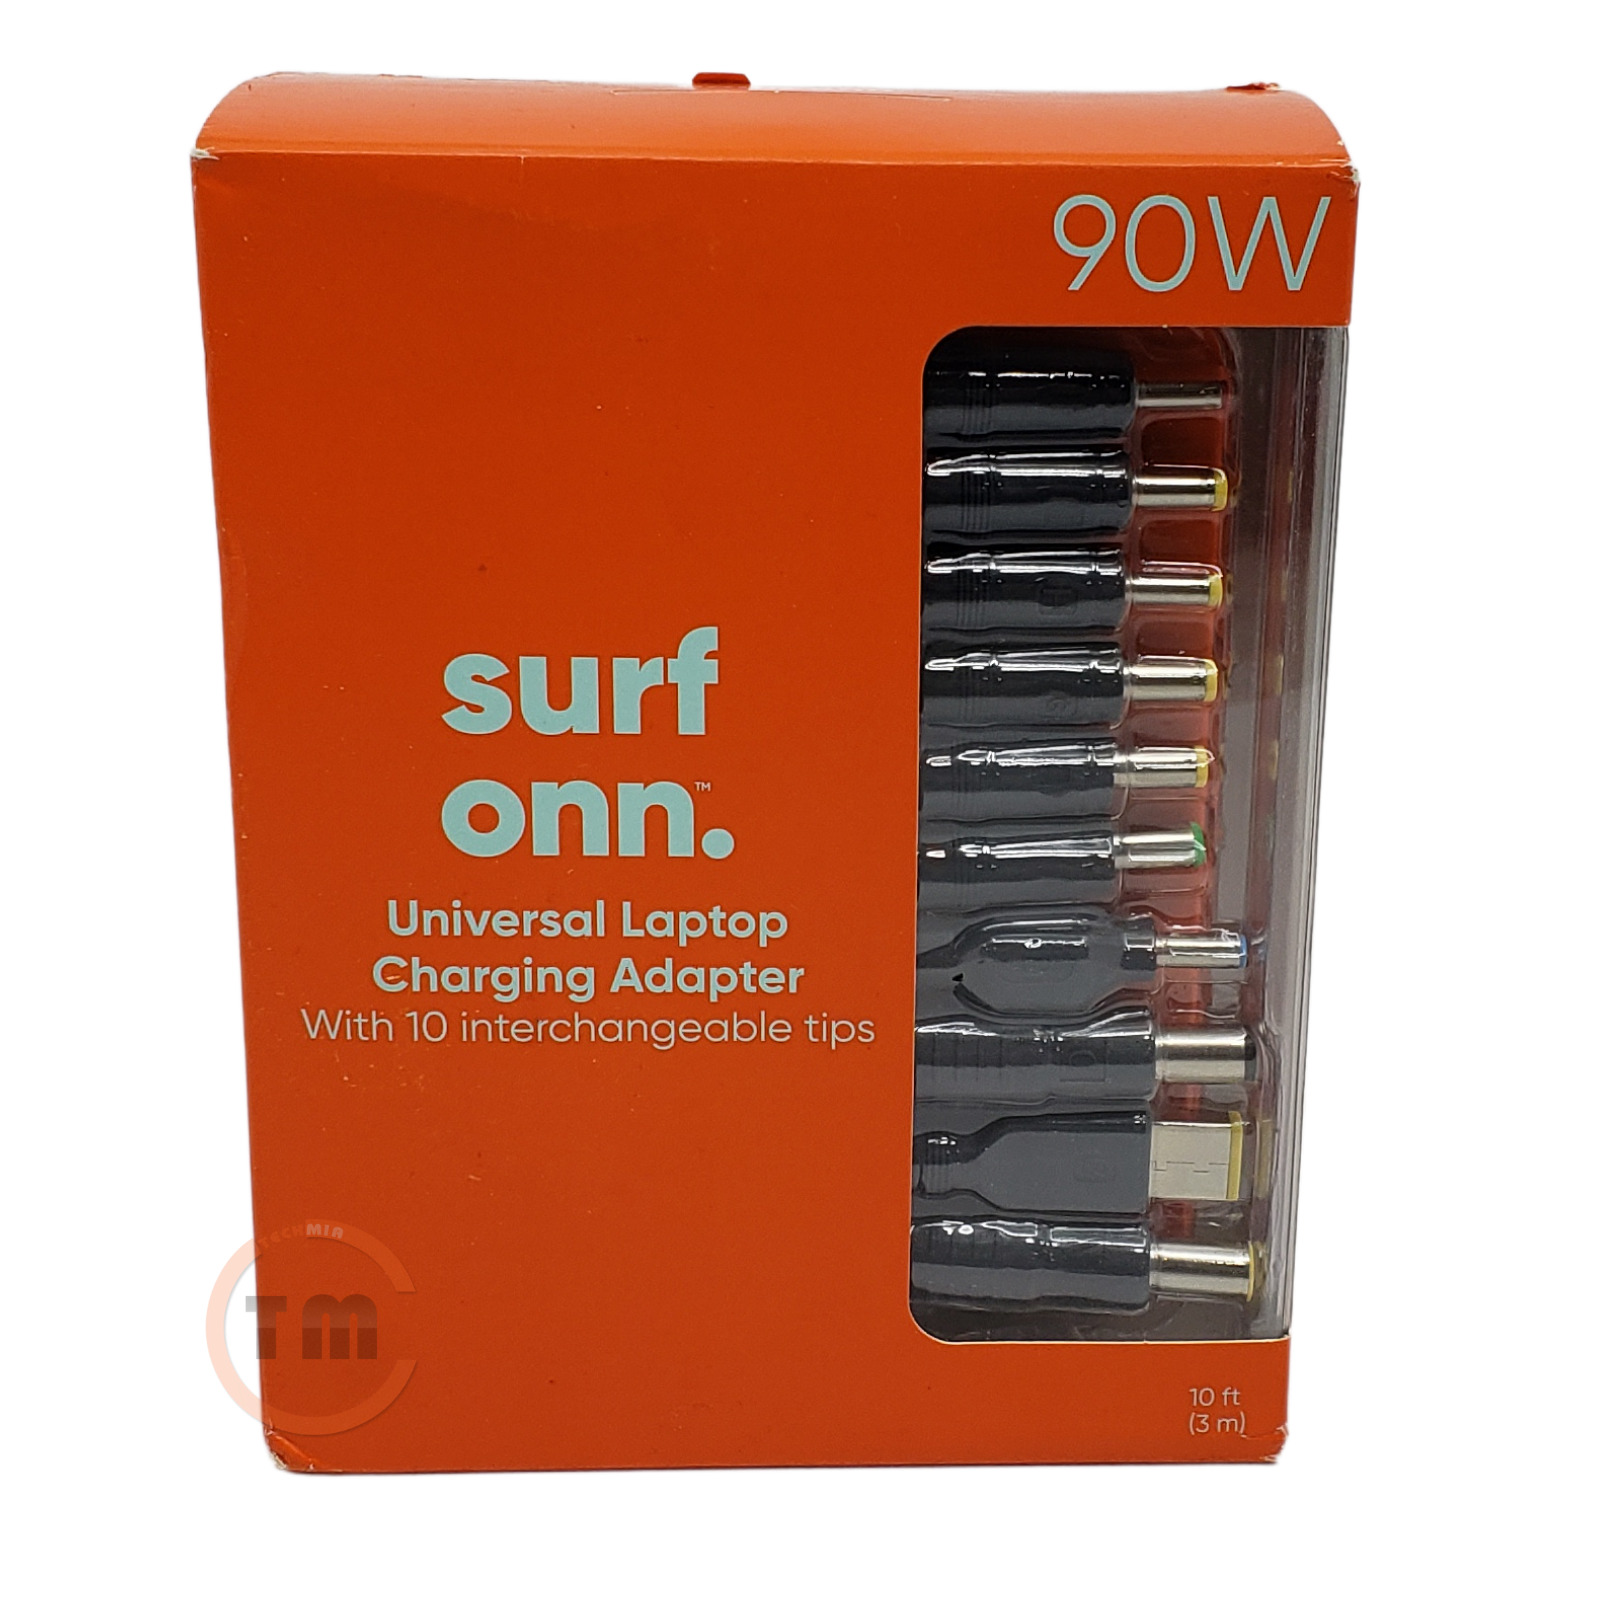 Onn Universal 90W Laptop Charger with 10 Interchangeable Tips (100009089) - LN™